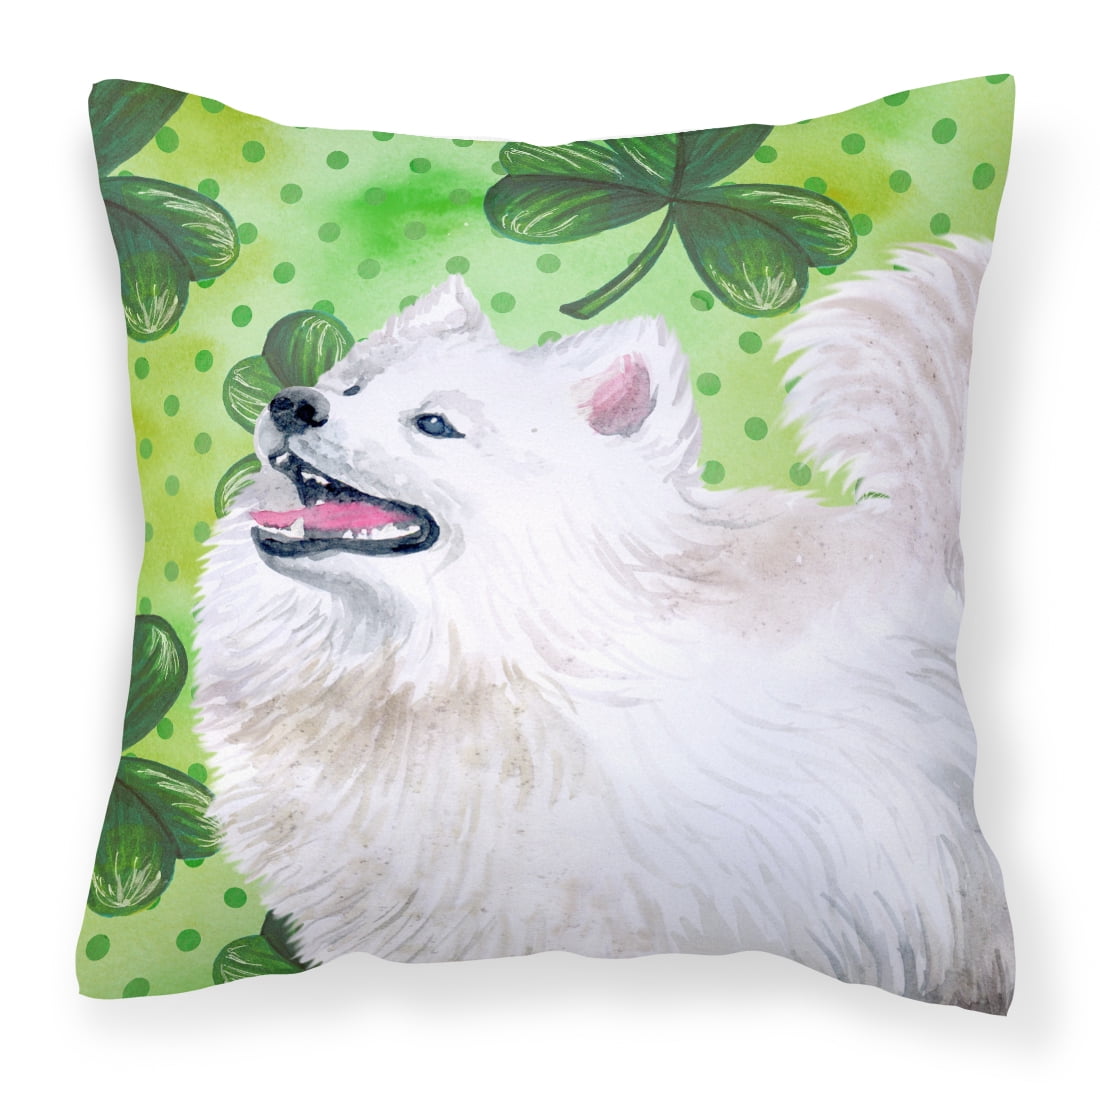 Funny Shedding Dog Pyrenee 2 Throw Pillow 18x18 Multicolor 